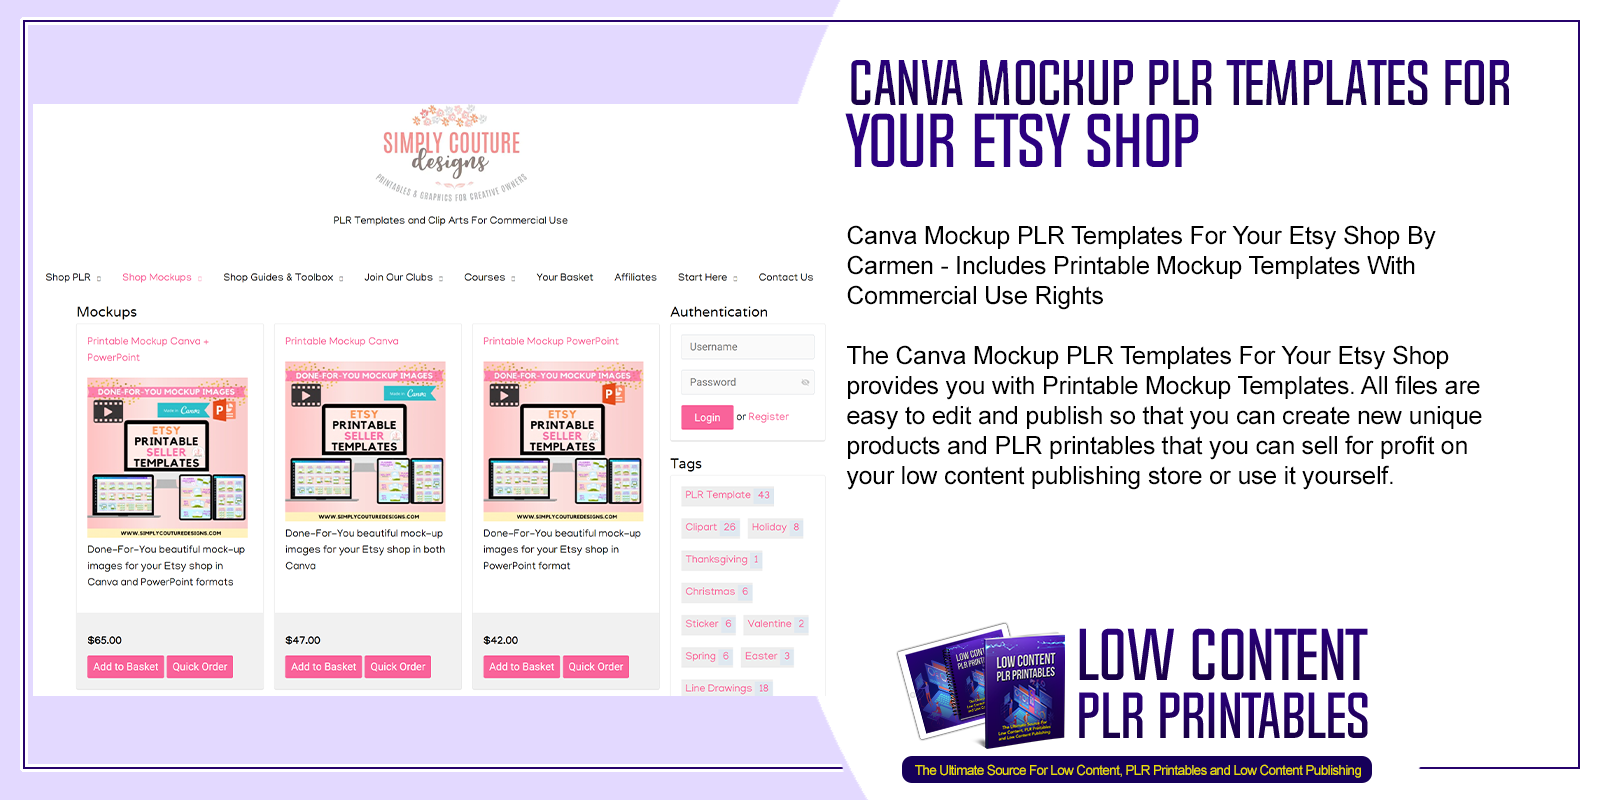 Canva Mockup PLR Templates For Your Etsy Shop